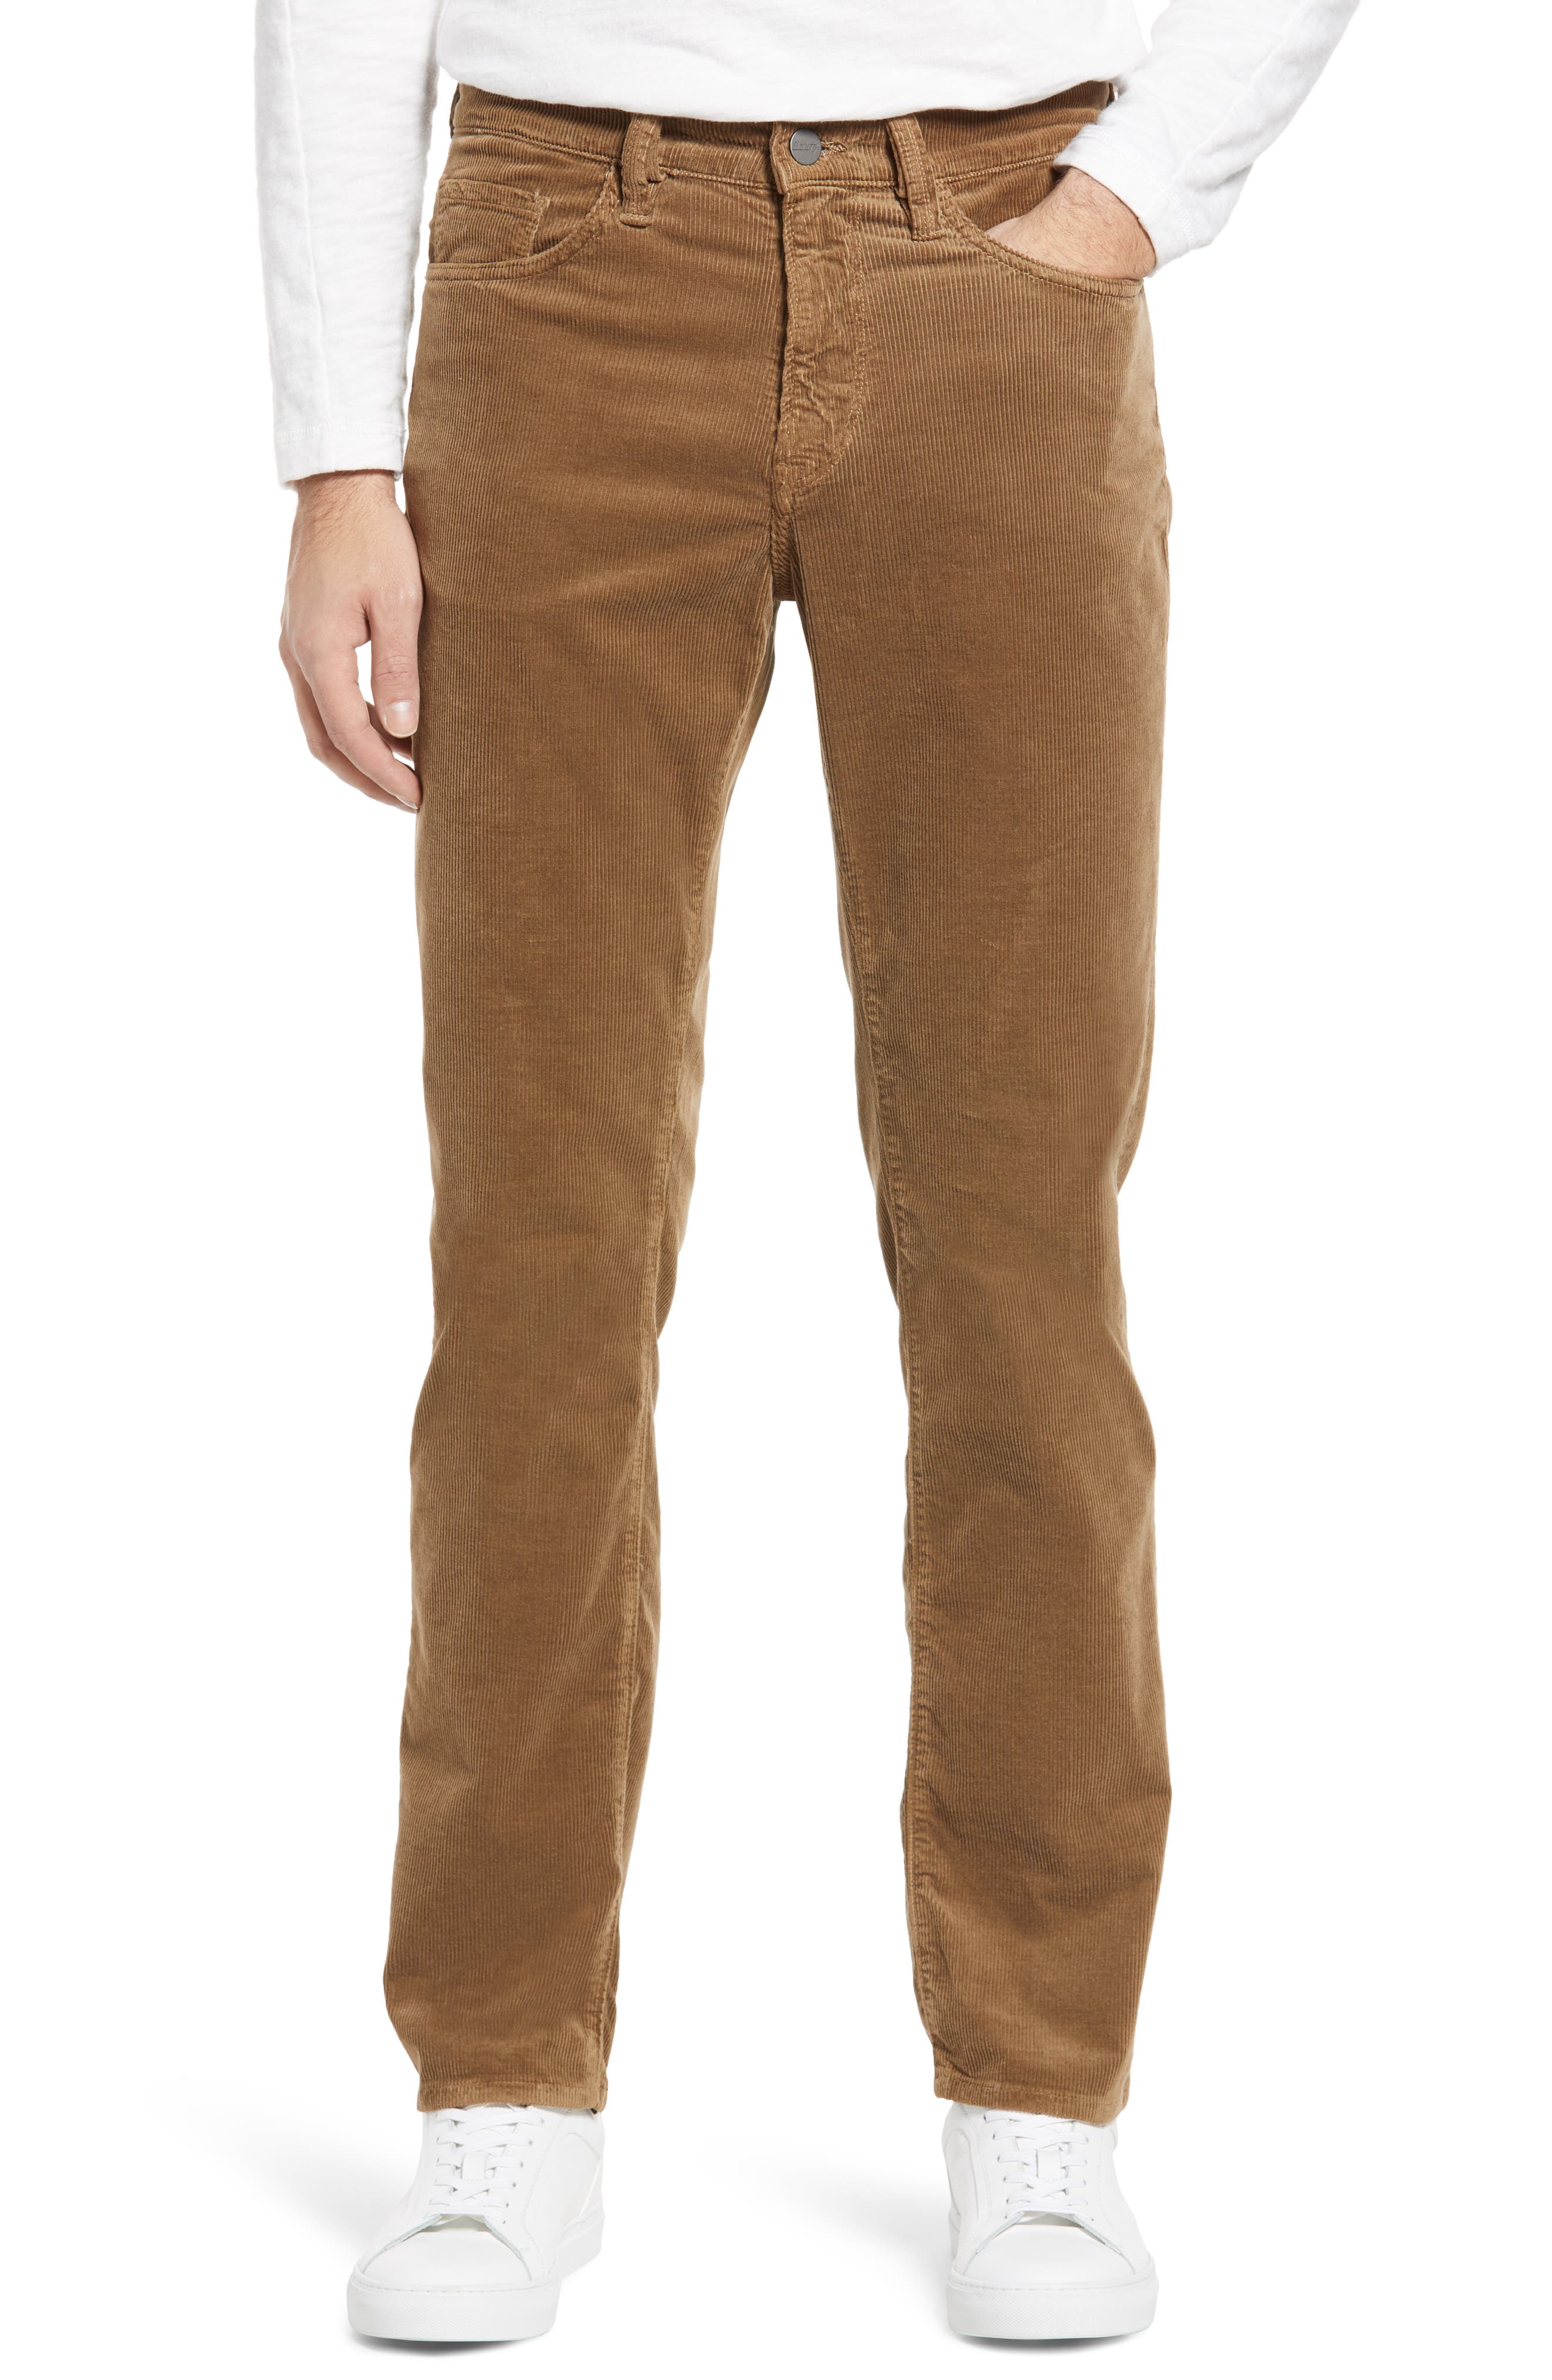 34 HERITAGE CHARISMA RELAXED FIT PANTS,889410657406